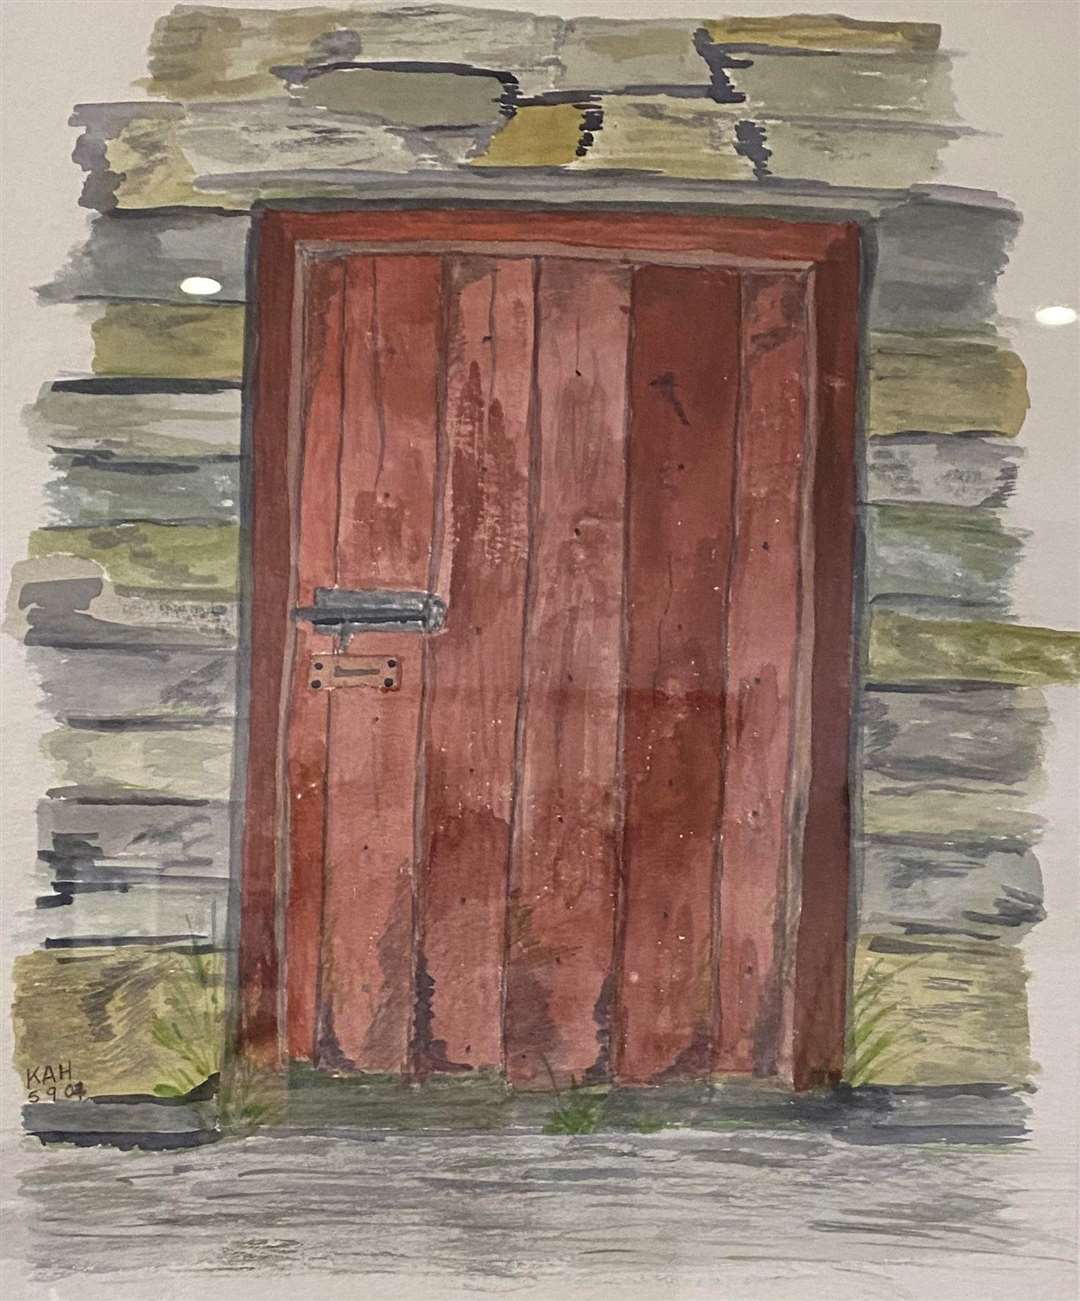 A painting by Gregory's mother Kathleen Hooker showing the barn door that Lord Horne was carried on. The picture hangs in the restaurant at Puldagon.